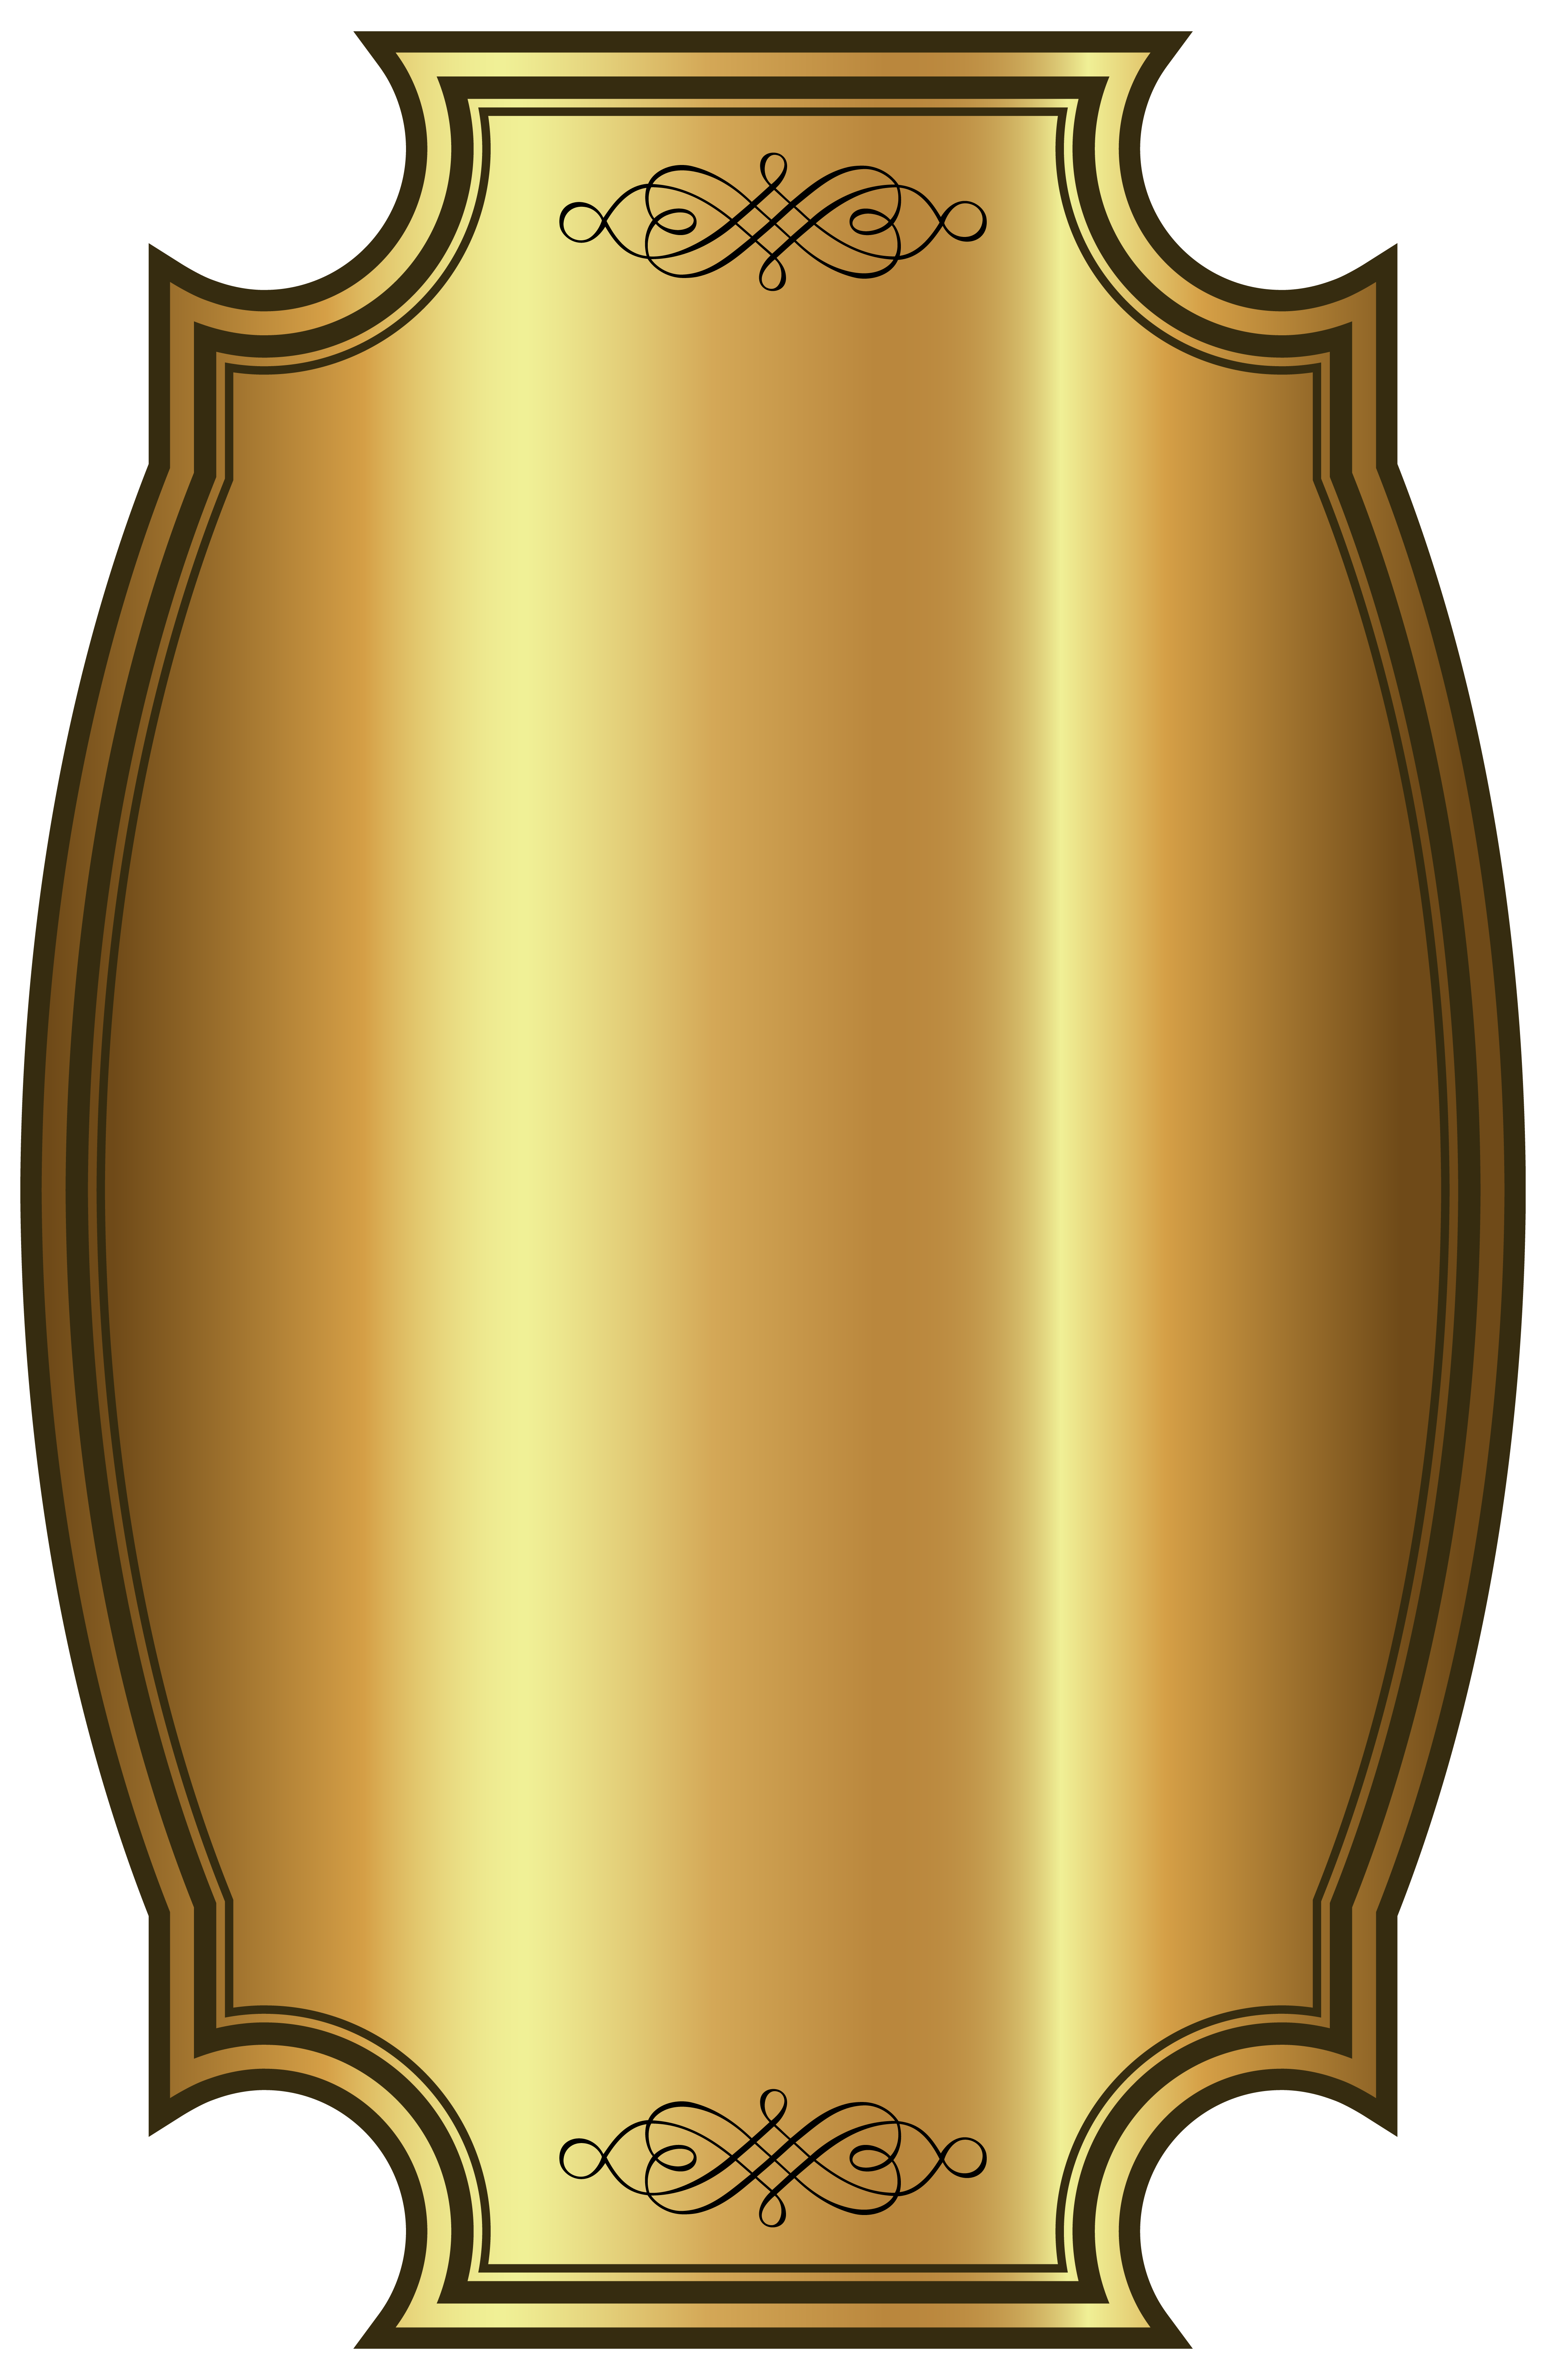 Luxury gold label template. See clipart golden